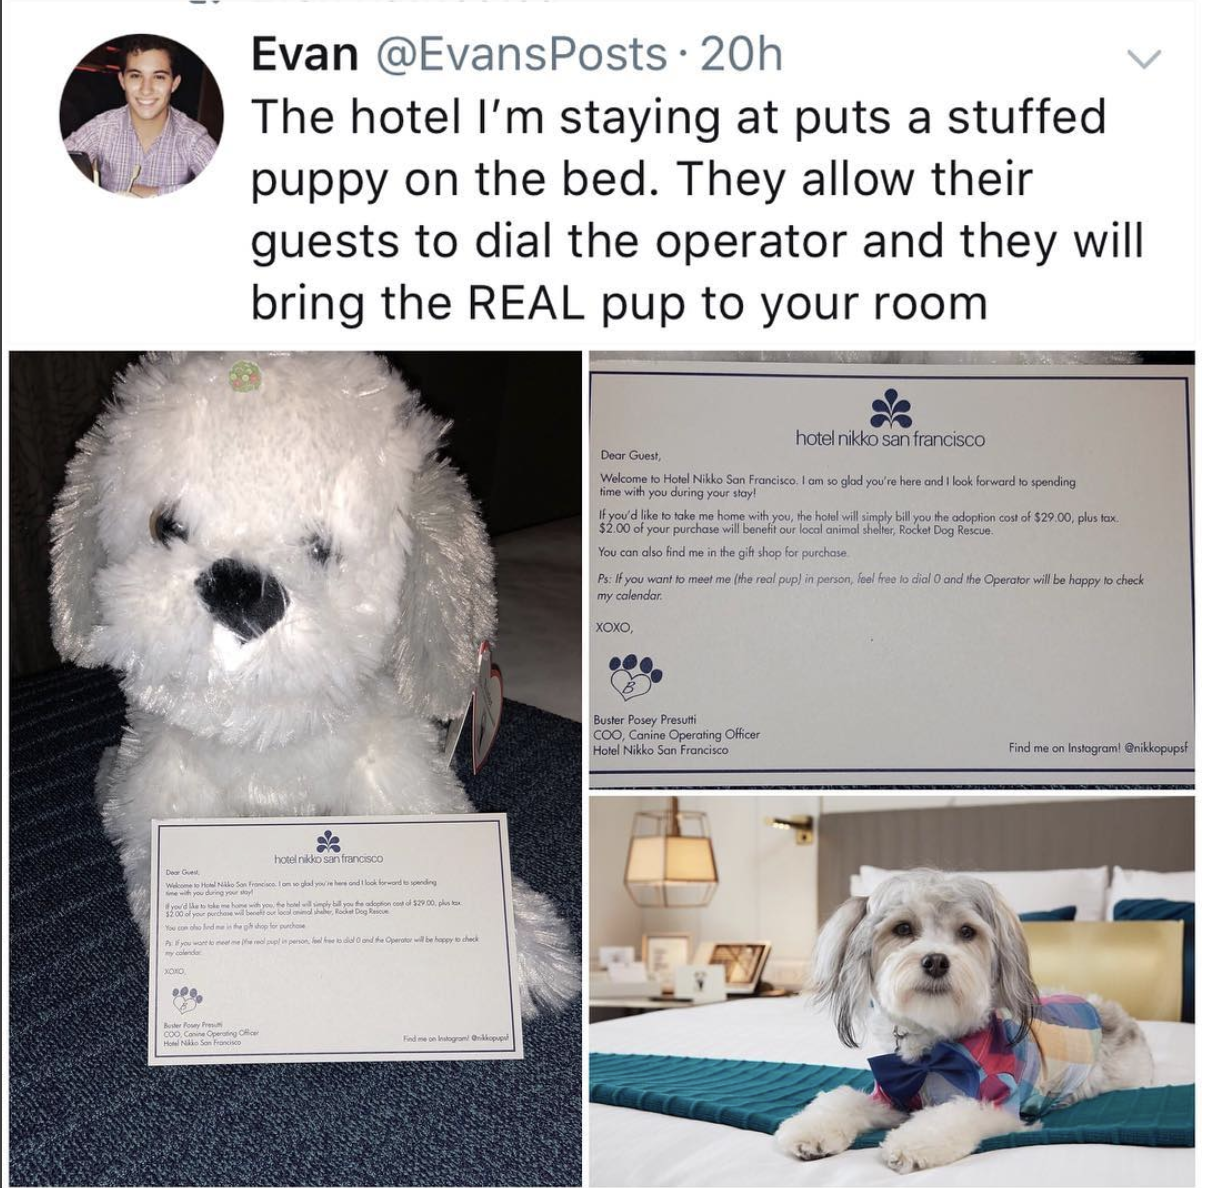 memes - hotel nikko san francisco puppy - Evan 20h The hotel I'm staying at puts a stuffed puppy on the bed. They allow their guests to dial the operator and they will bring the Real pup to your room honosan ww